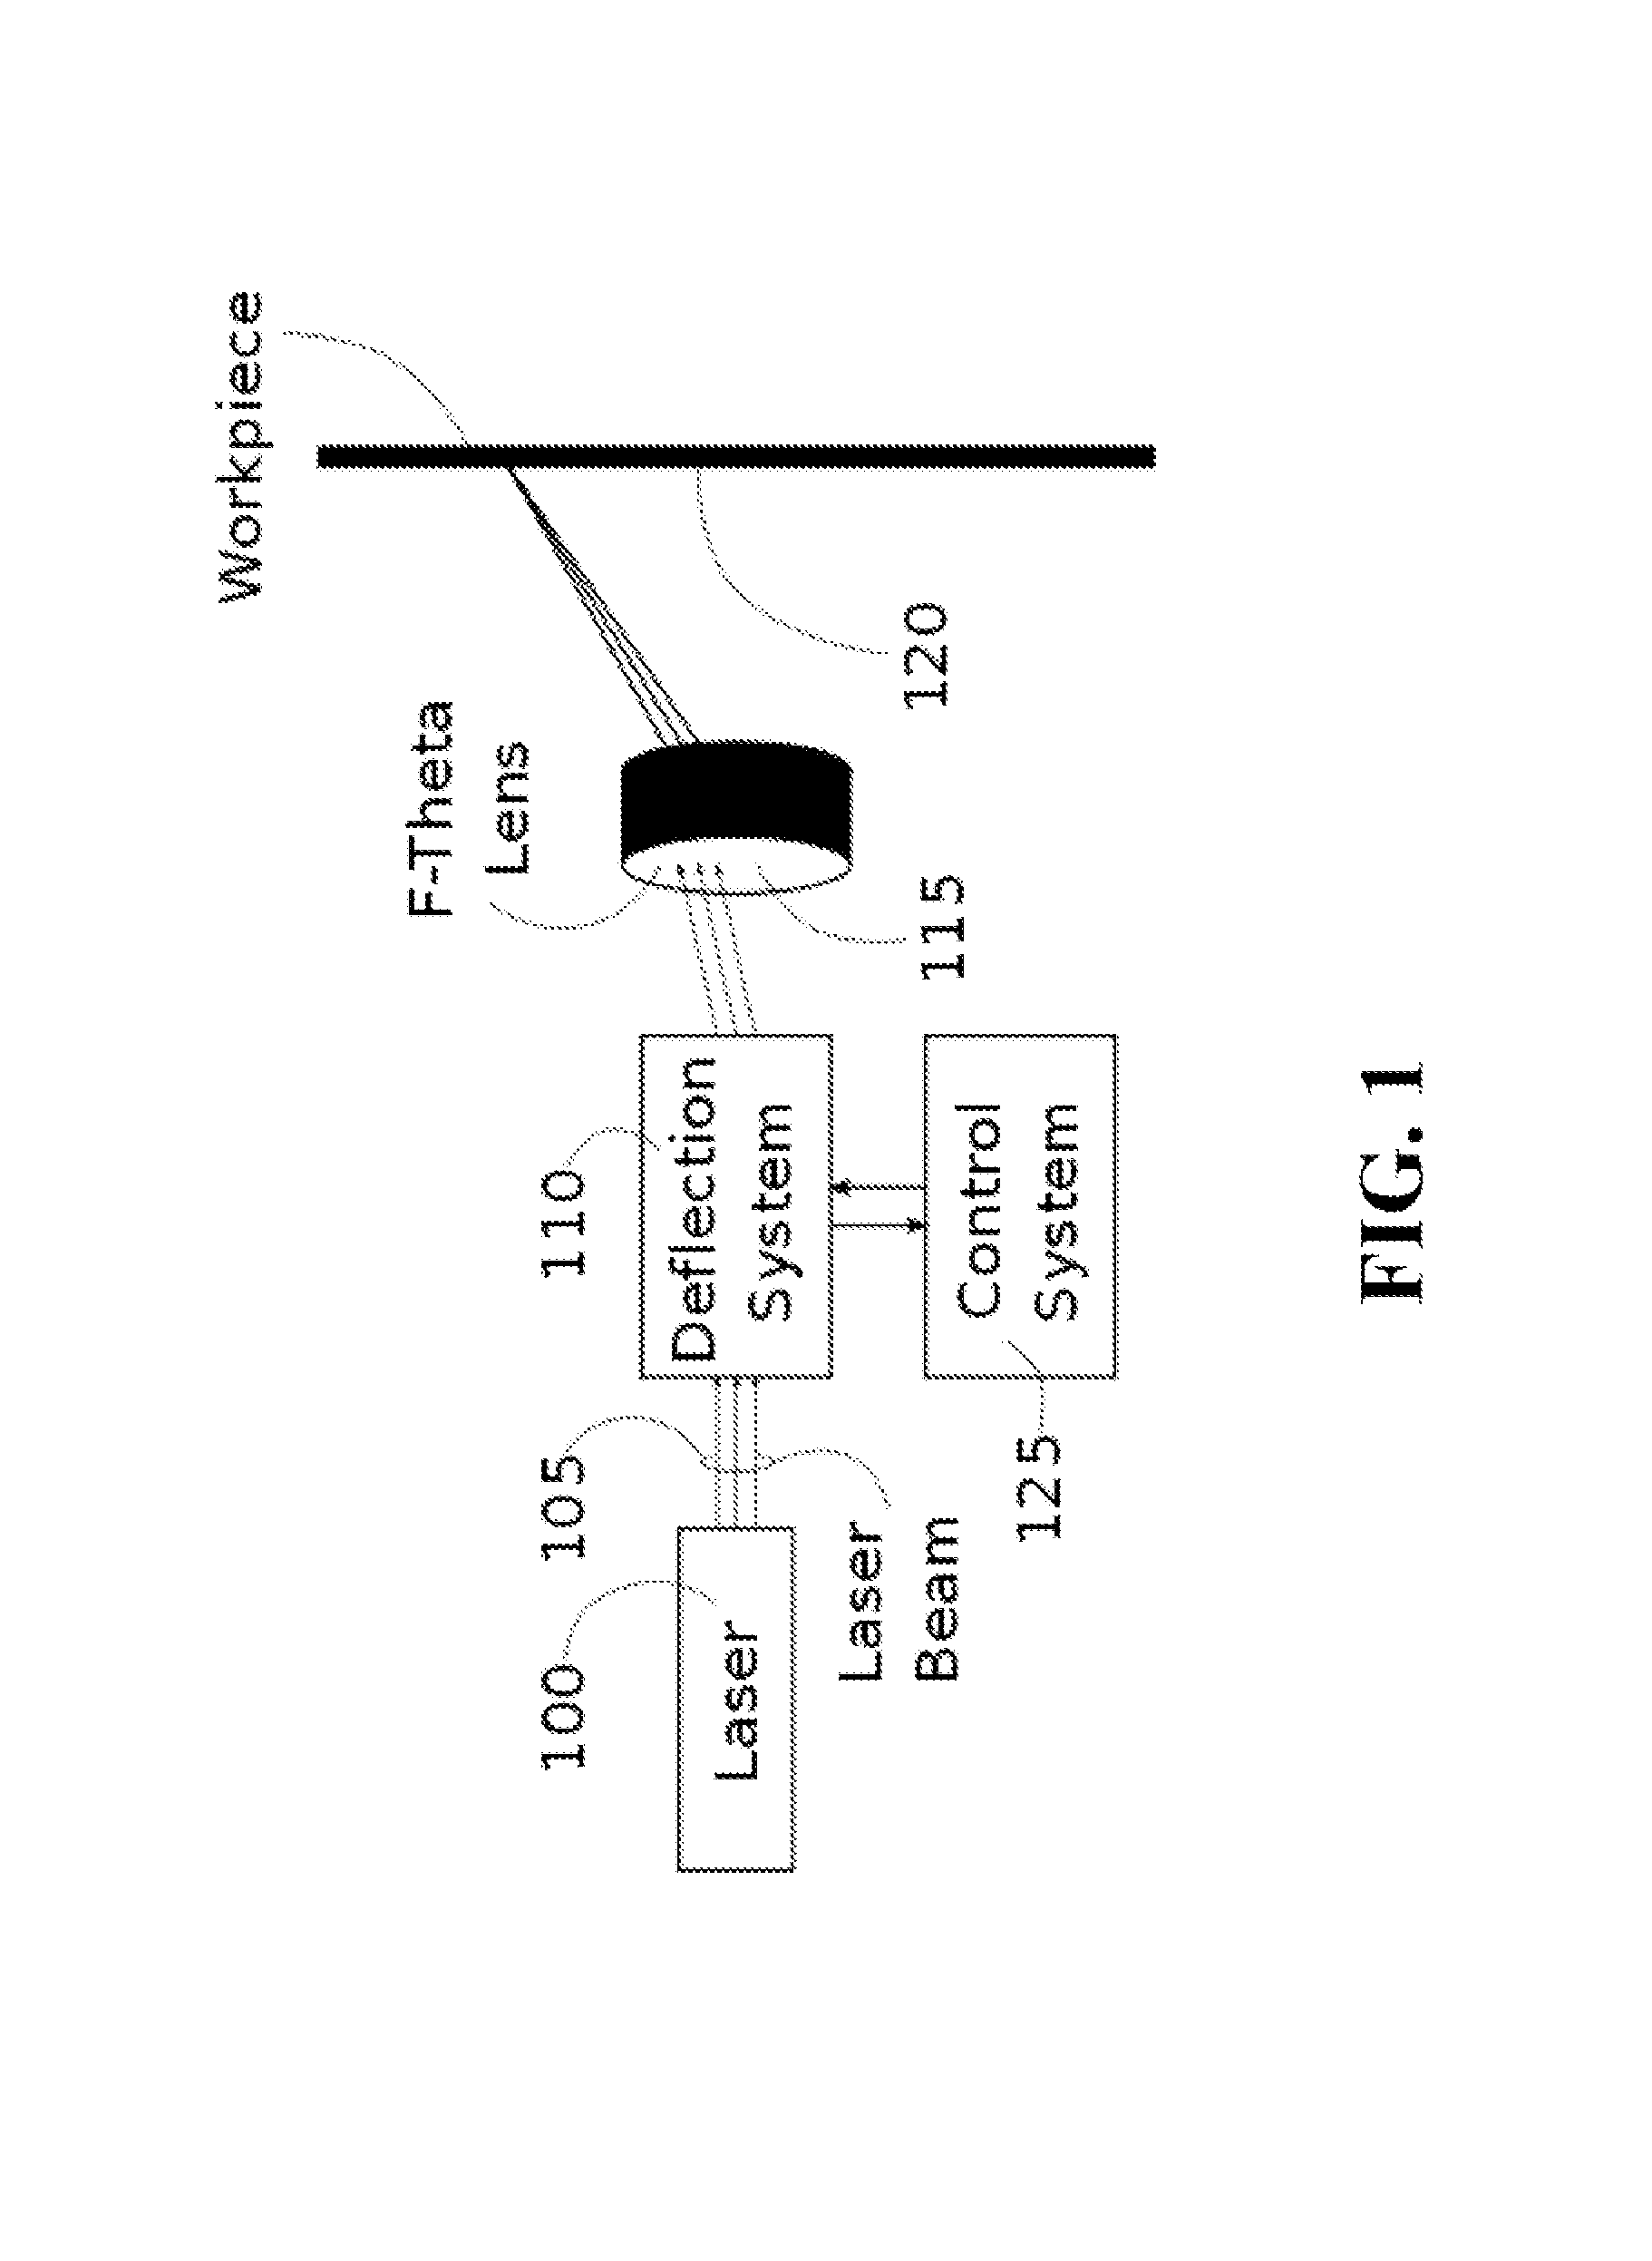 System and method for calibrating laser cutting machines